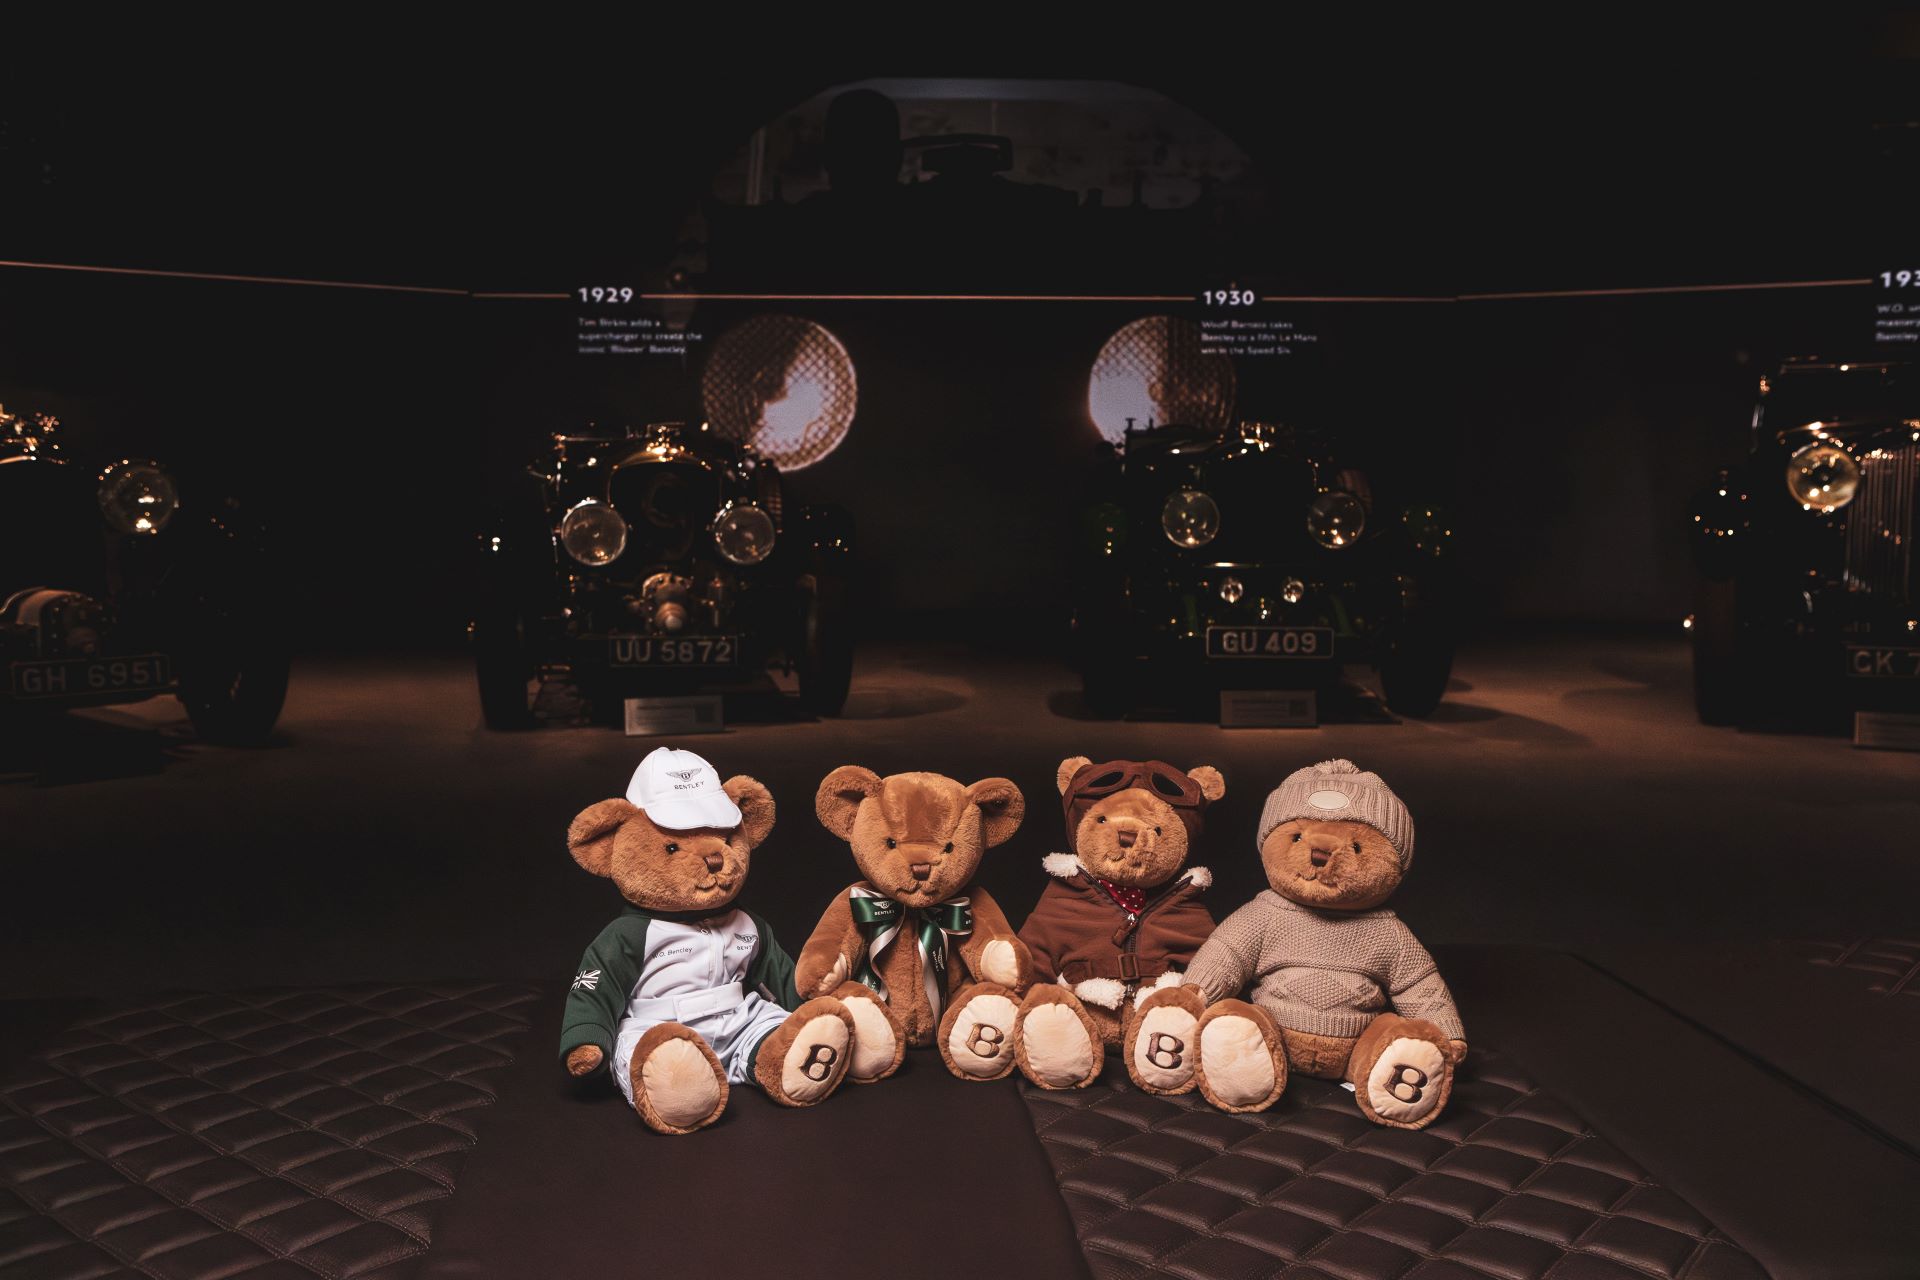 Bentley Bears are driving home for a cuddly Christmas